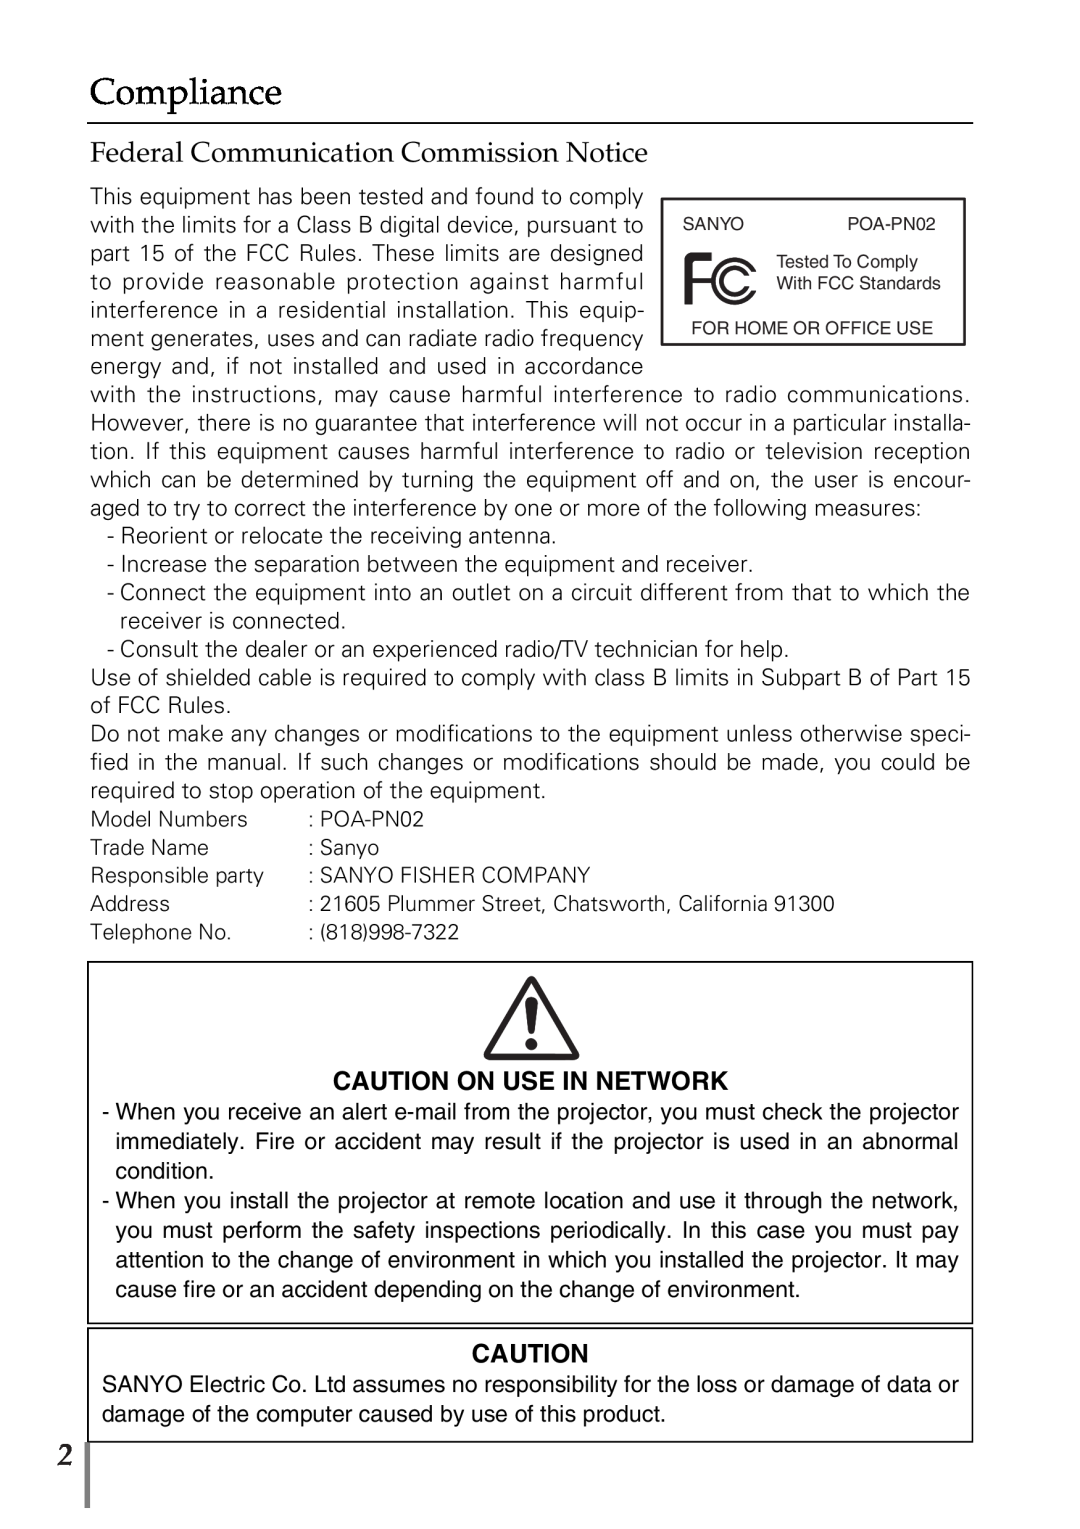 Sanyo POA-PN02 owner manual Compliance, Federal Communication Commission Notice, Caution On Use In Network 